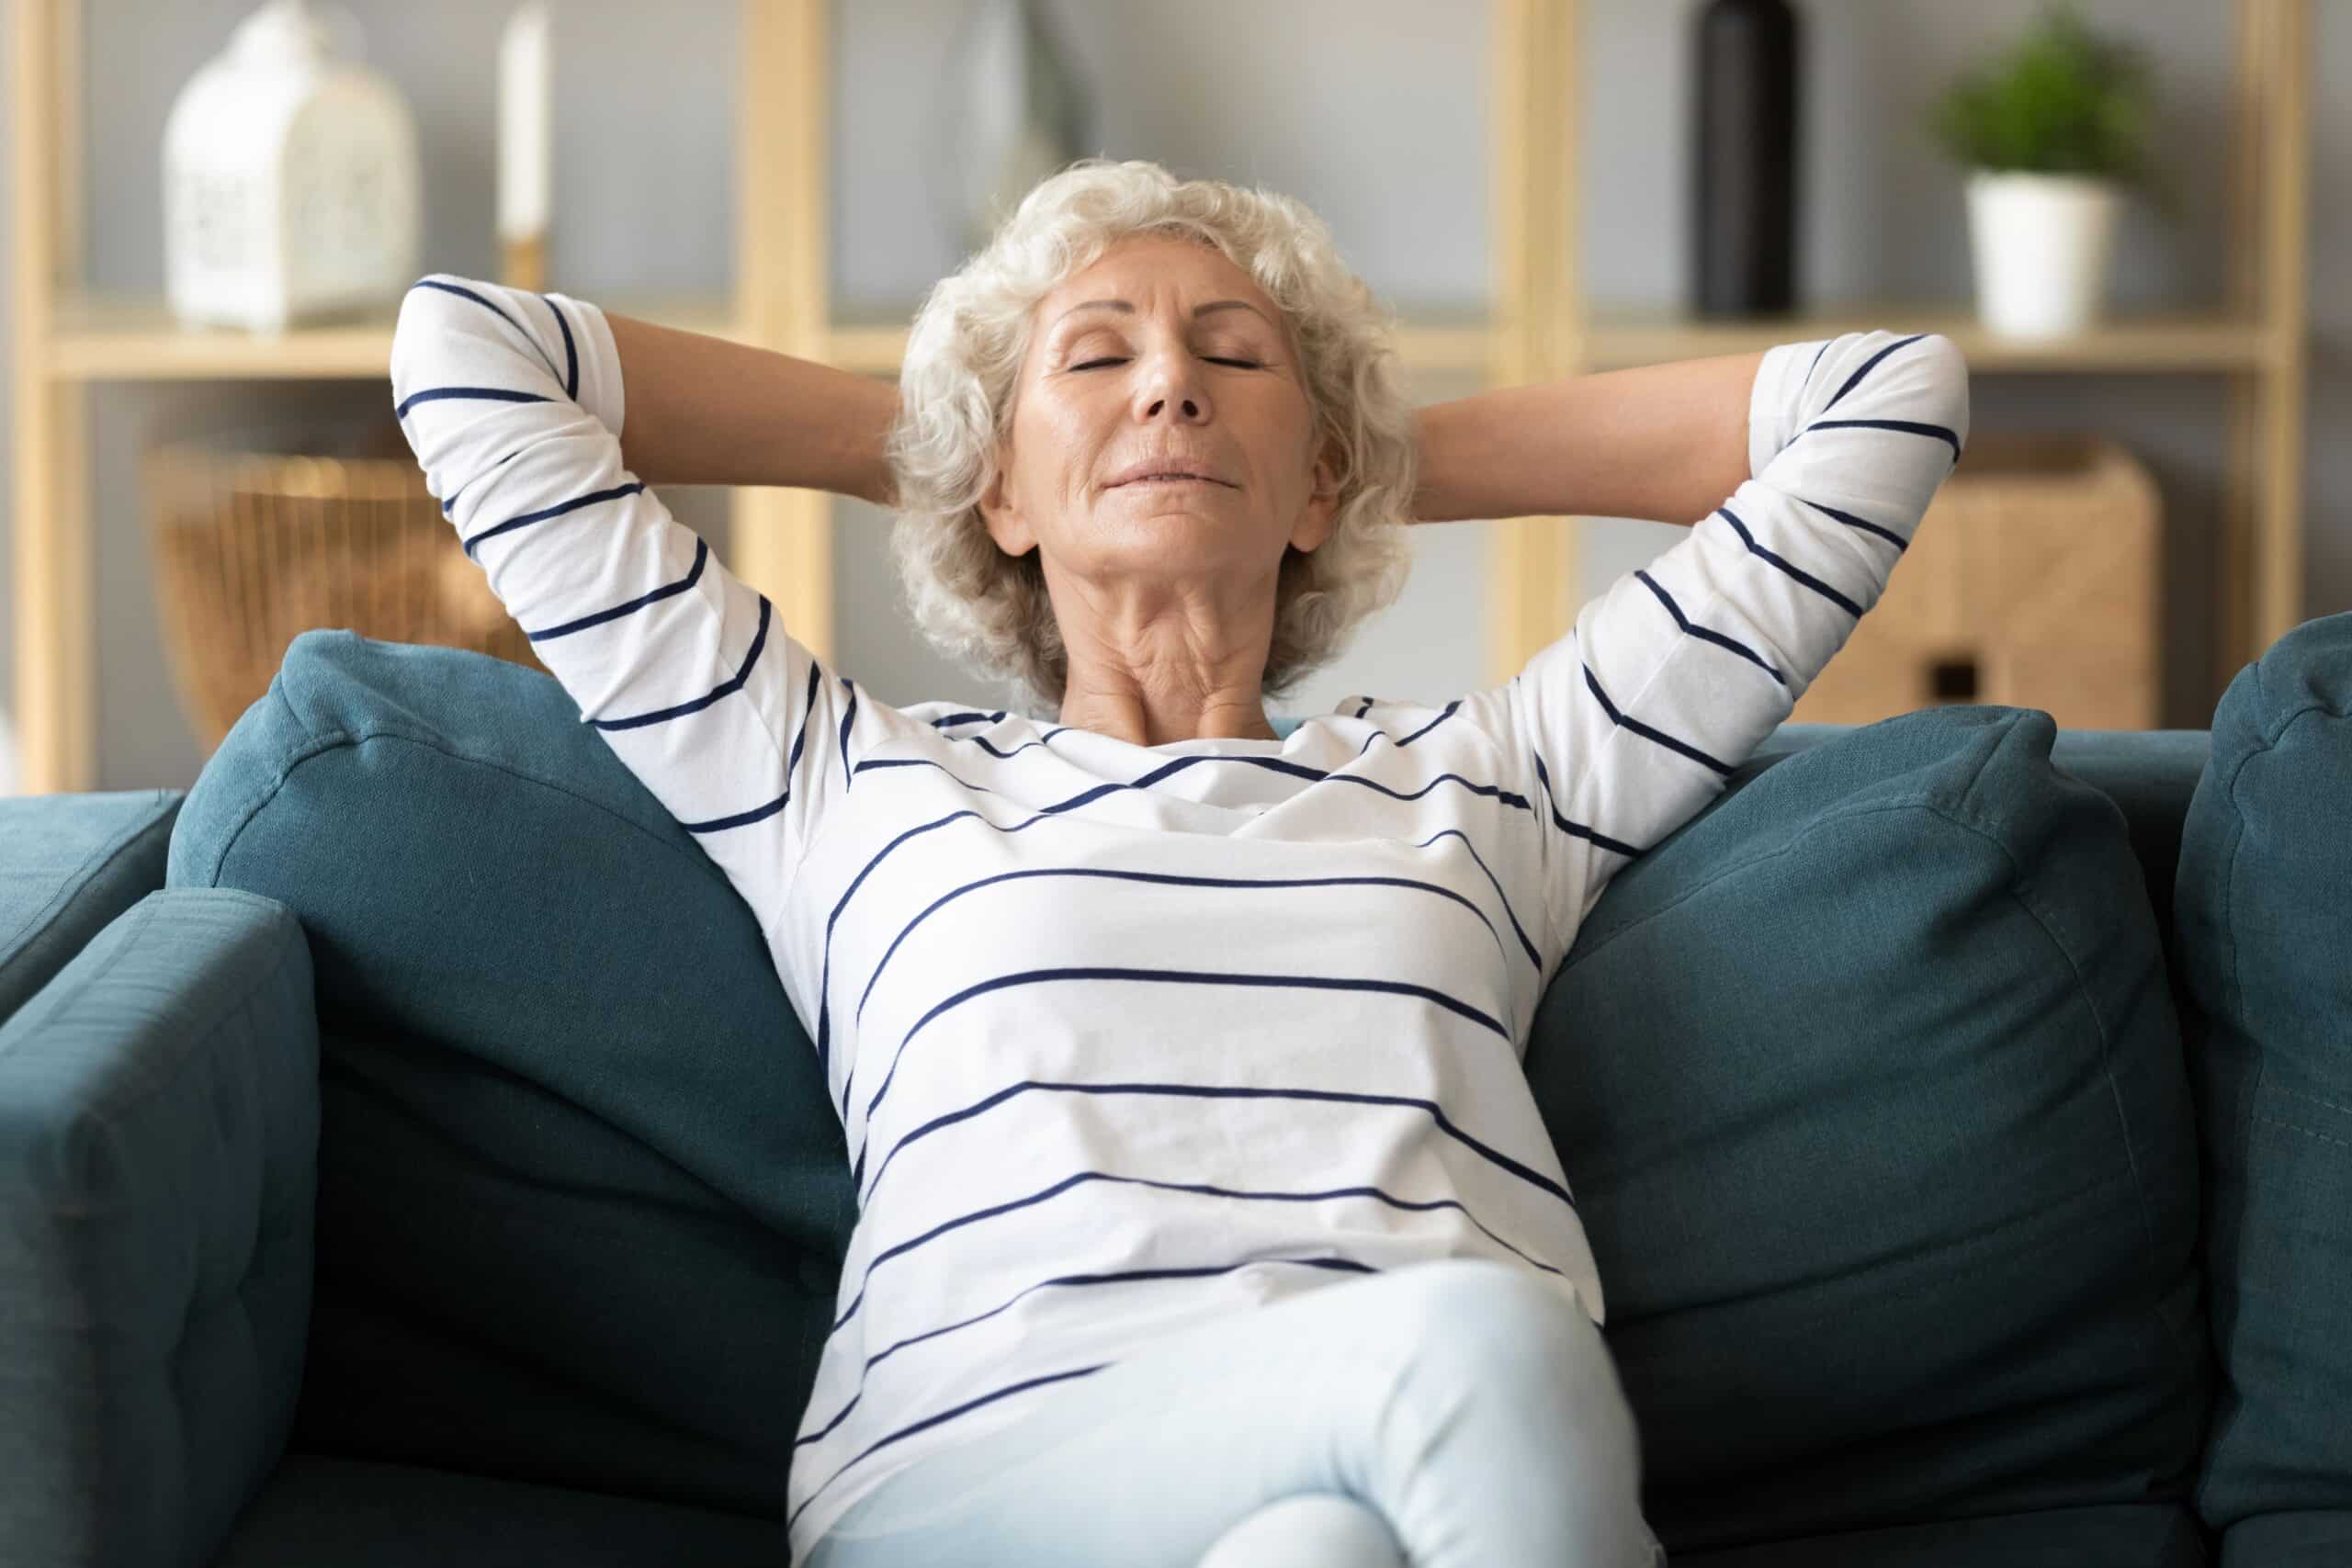 Senior woman relaxing on couch with eyes closed